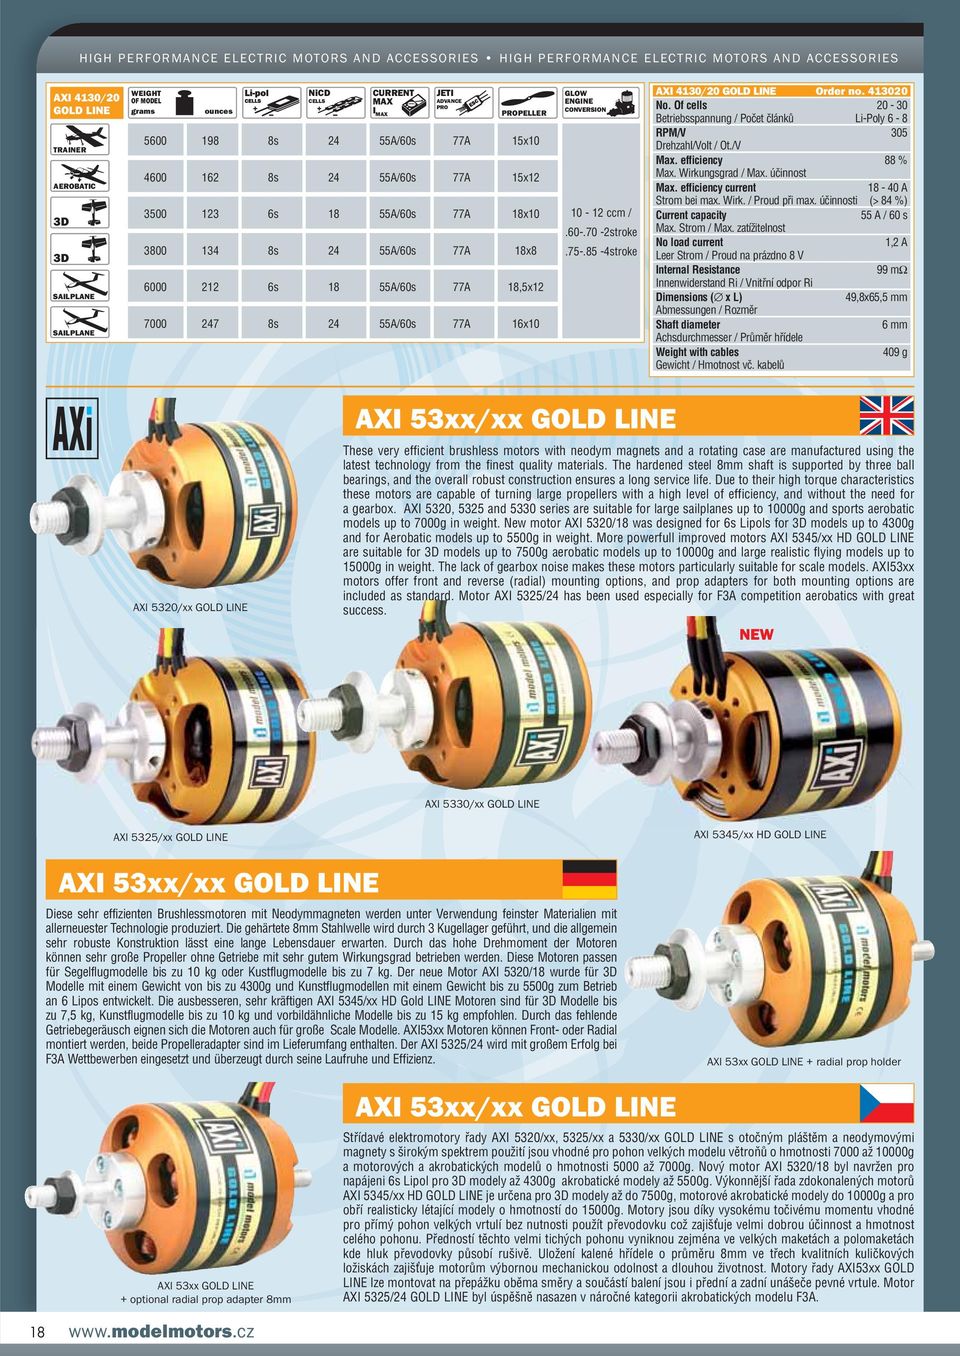 účinnosti (> 84 %) 55 A / 60 s 1,2 A 99 mω 49,8x65,5 mm 6 mm 409 g AXI 5320/xx AXI 53xx/xx These very efficient brushless motors with neodym magnets and a rotating case are manufactured using the